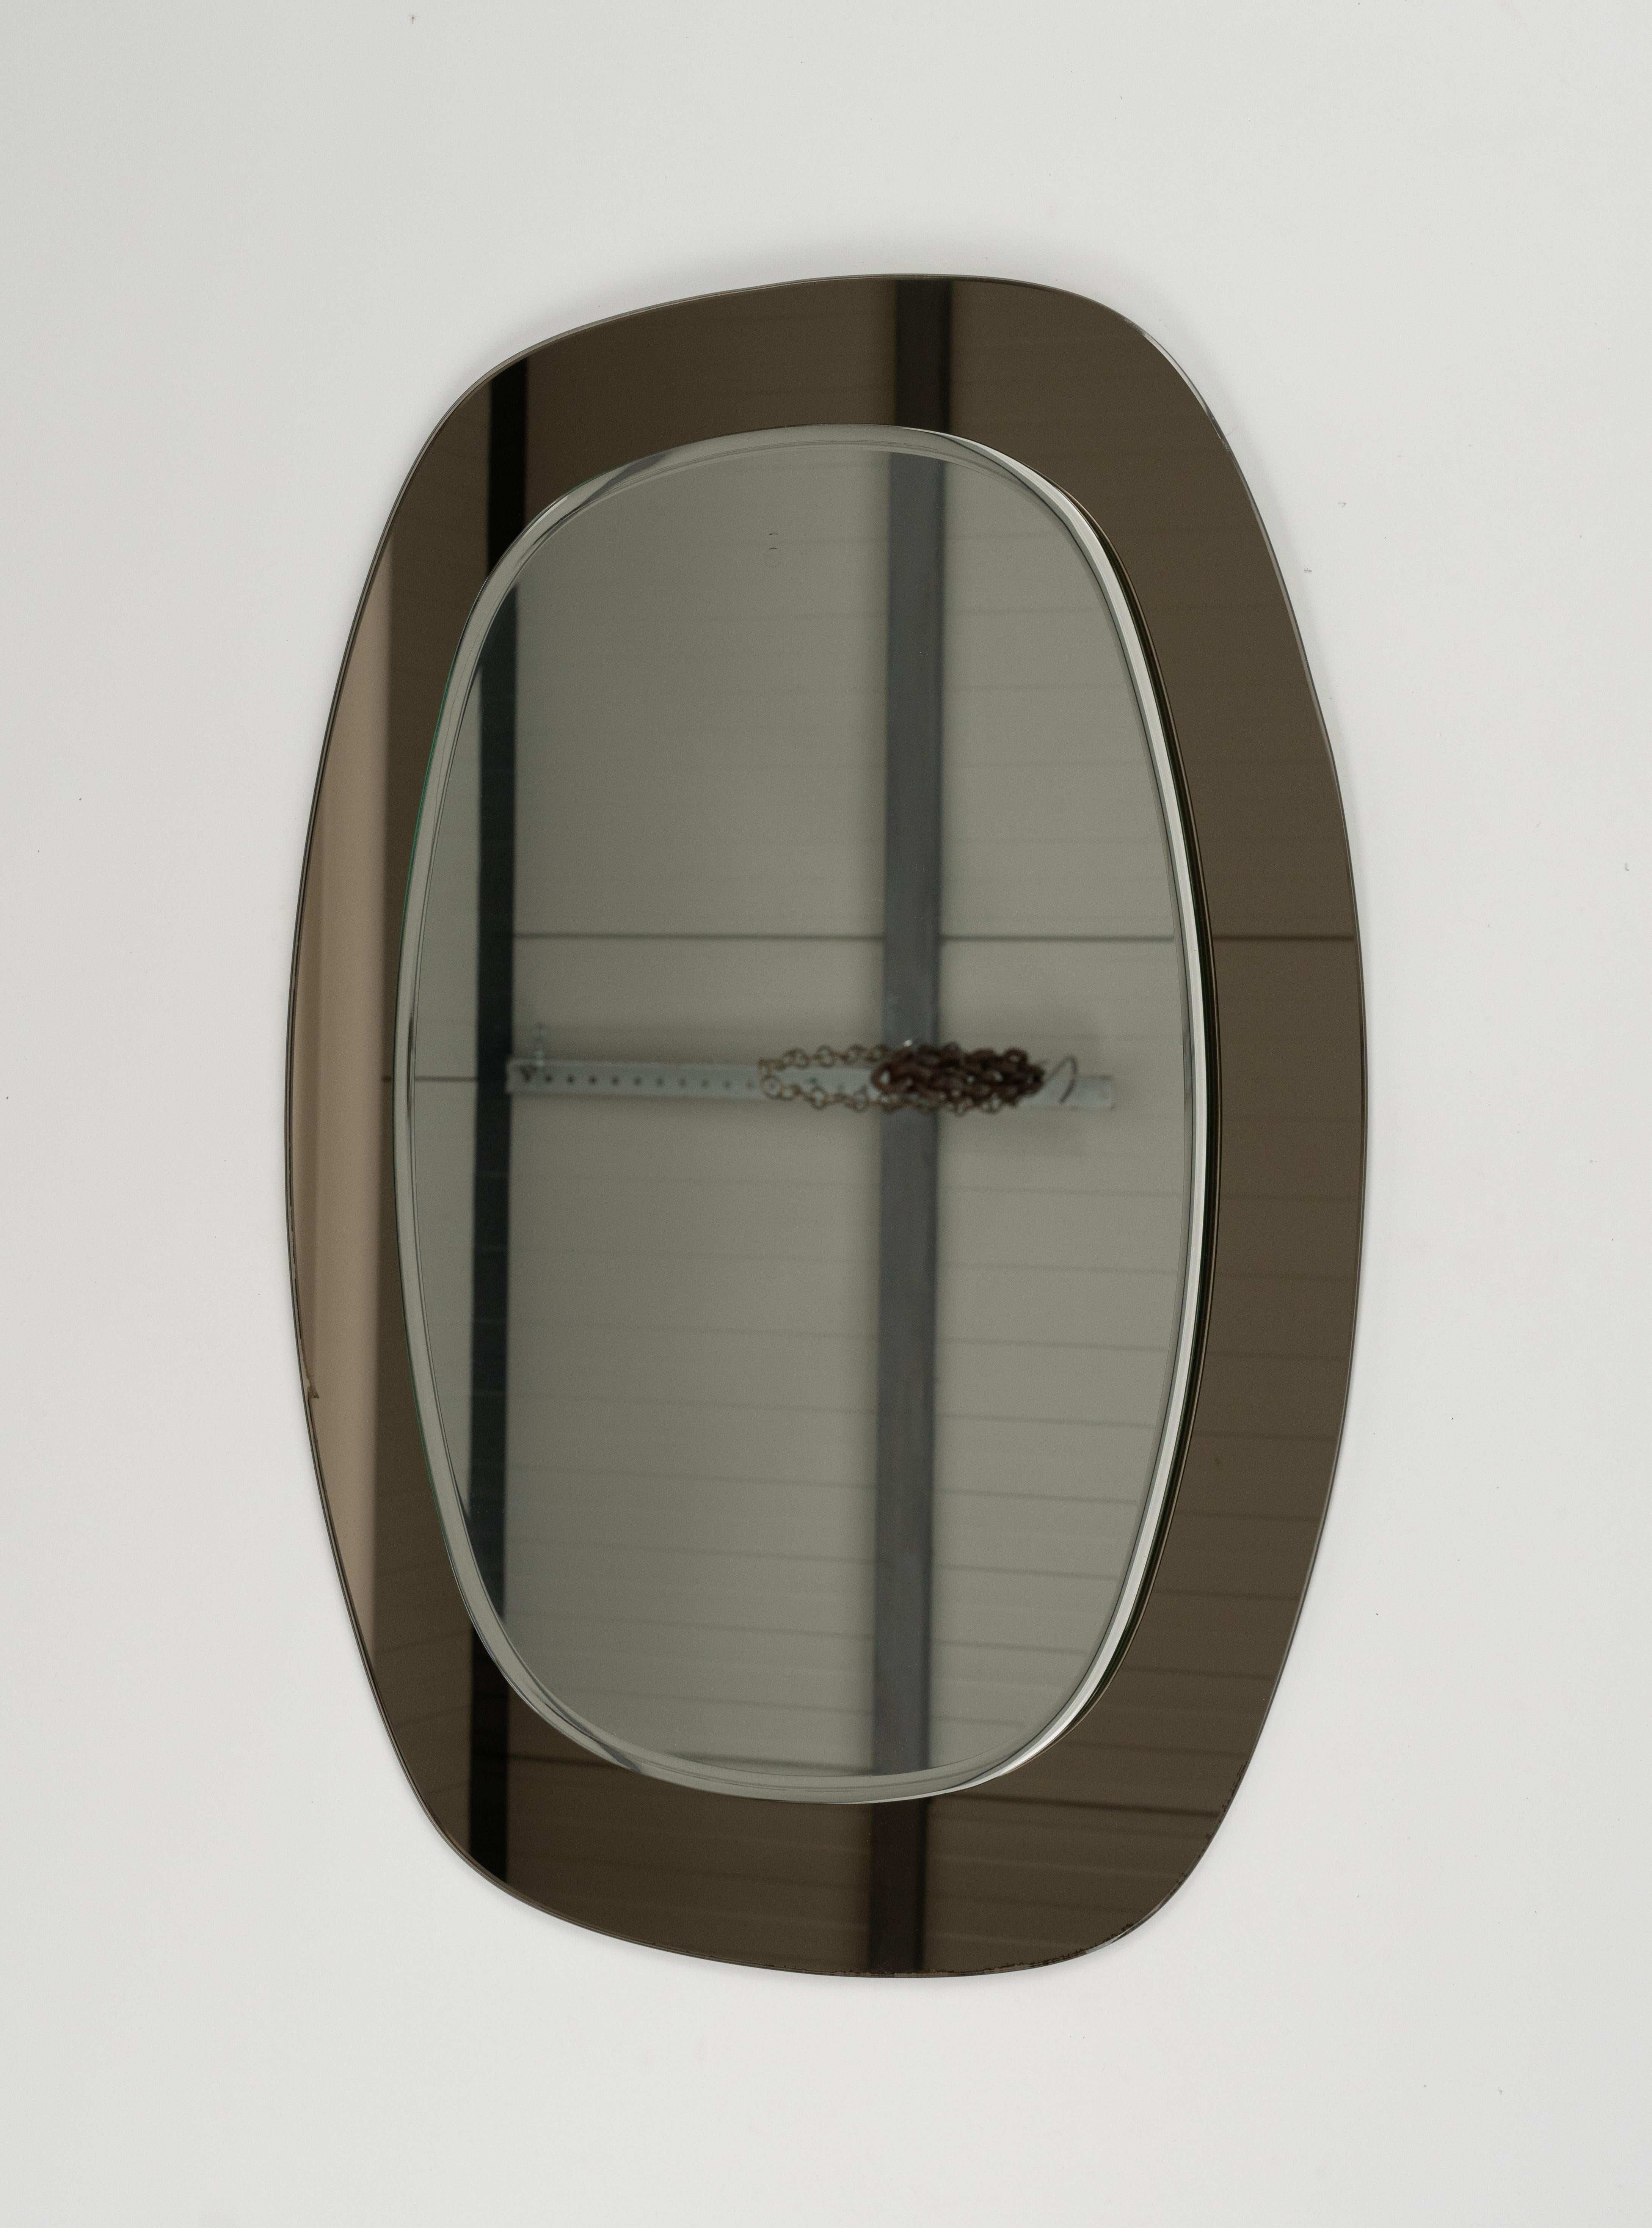 Midcentury Cristal Art Oval Wall Mirror with Smoked Frame, Italy 1960s For Sale 2